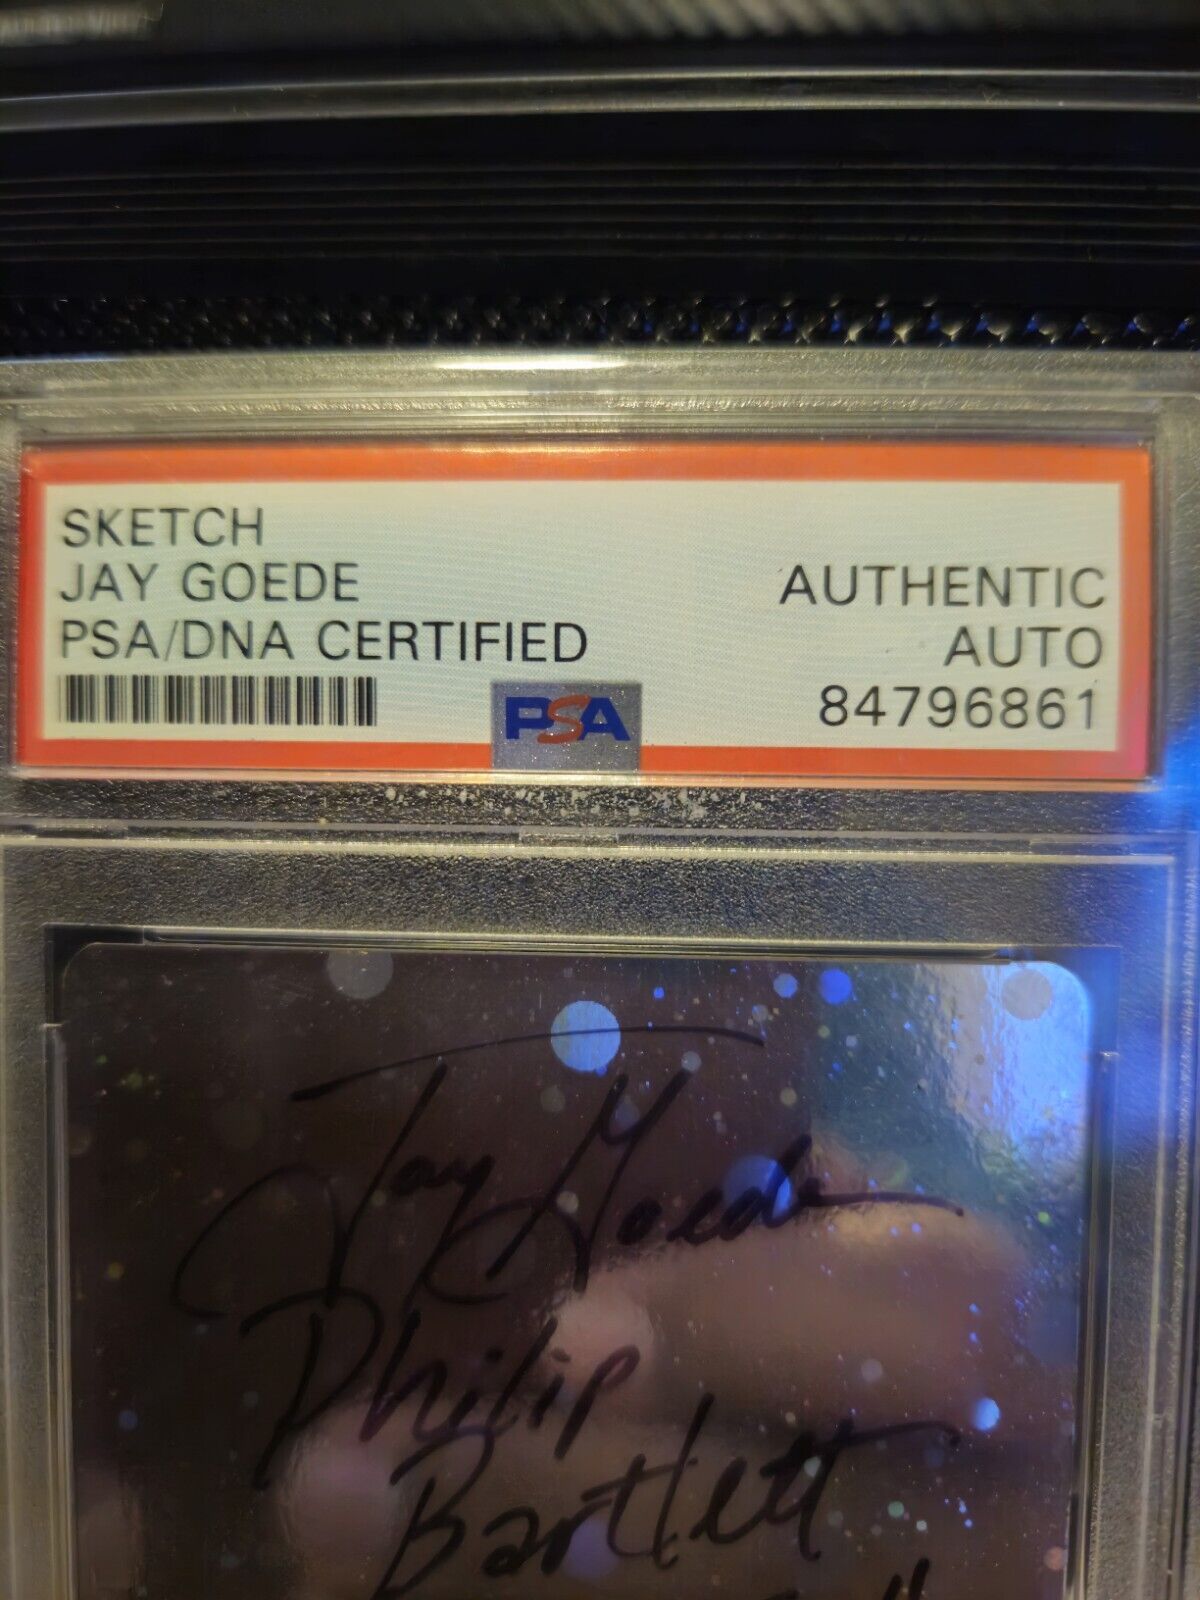 Jay Goede Sketch Mewtwo PSA/DNA AUTOGRAPH